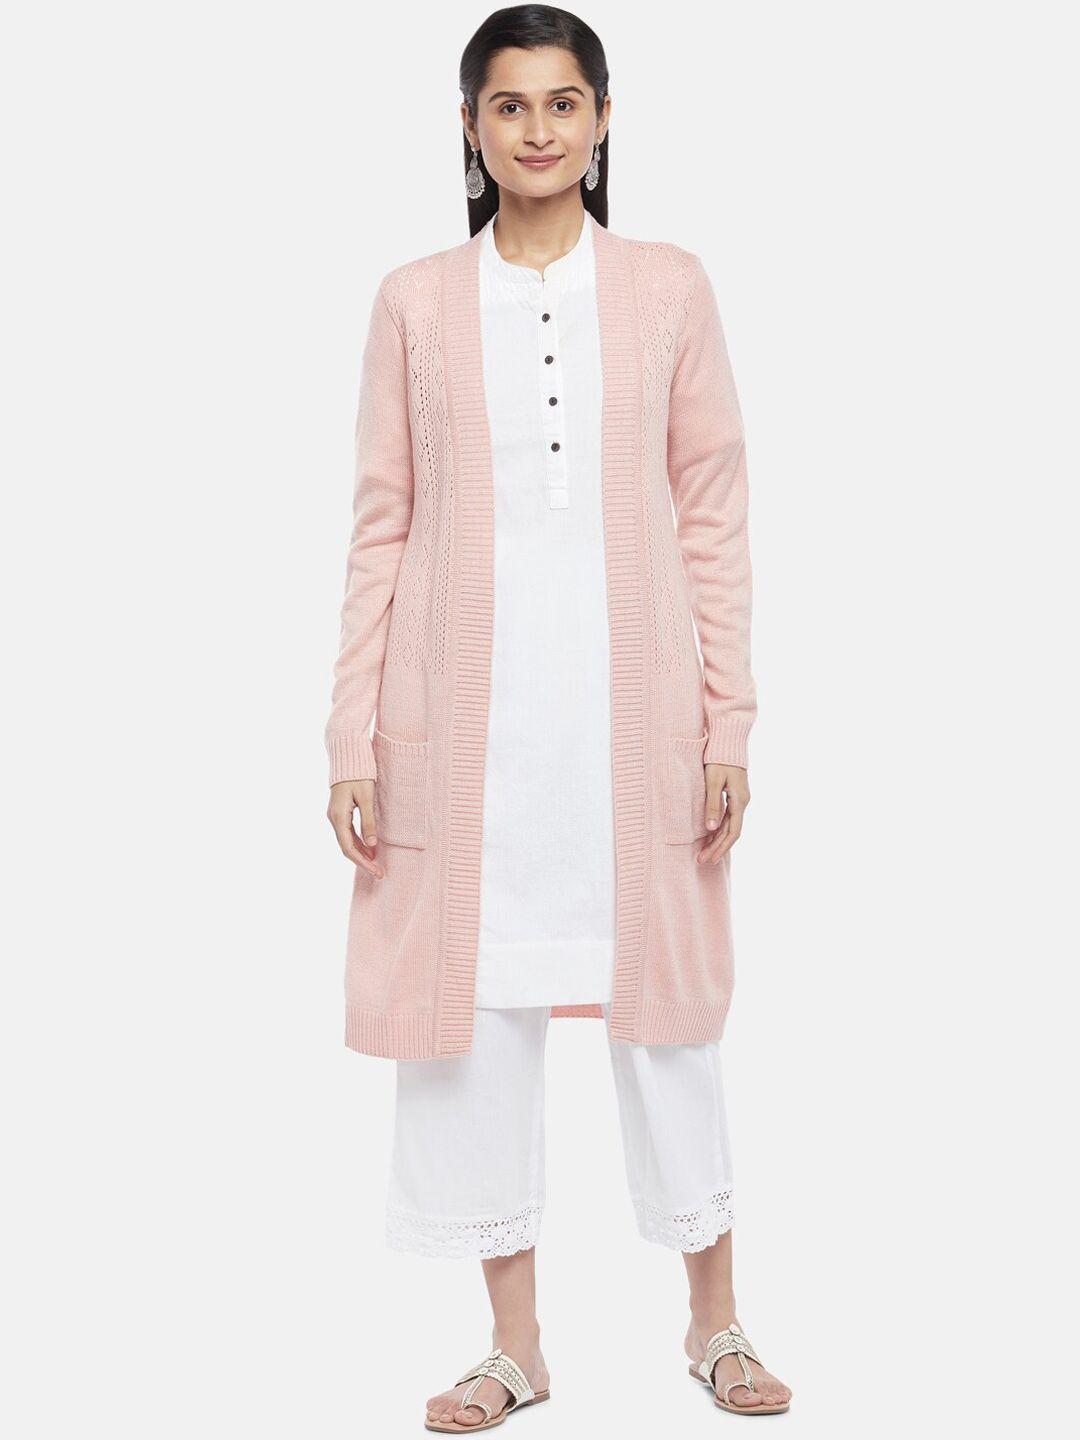 rangmanch by pantaloons women peach-coloured acrylic longline open front jacket with embroidered